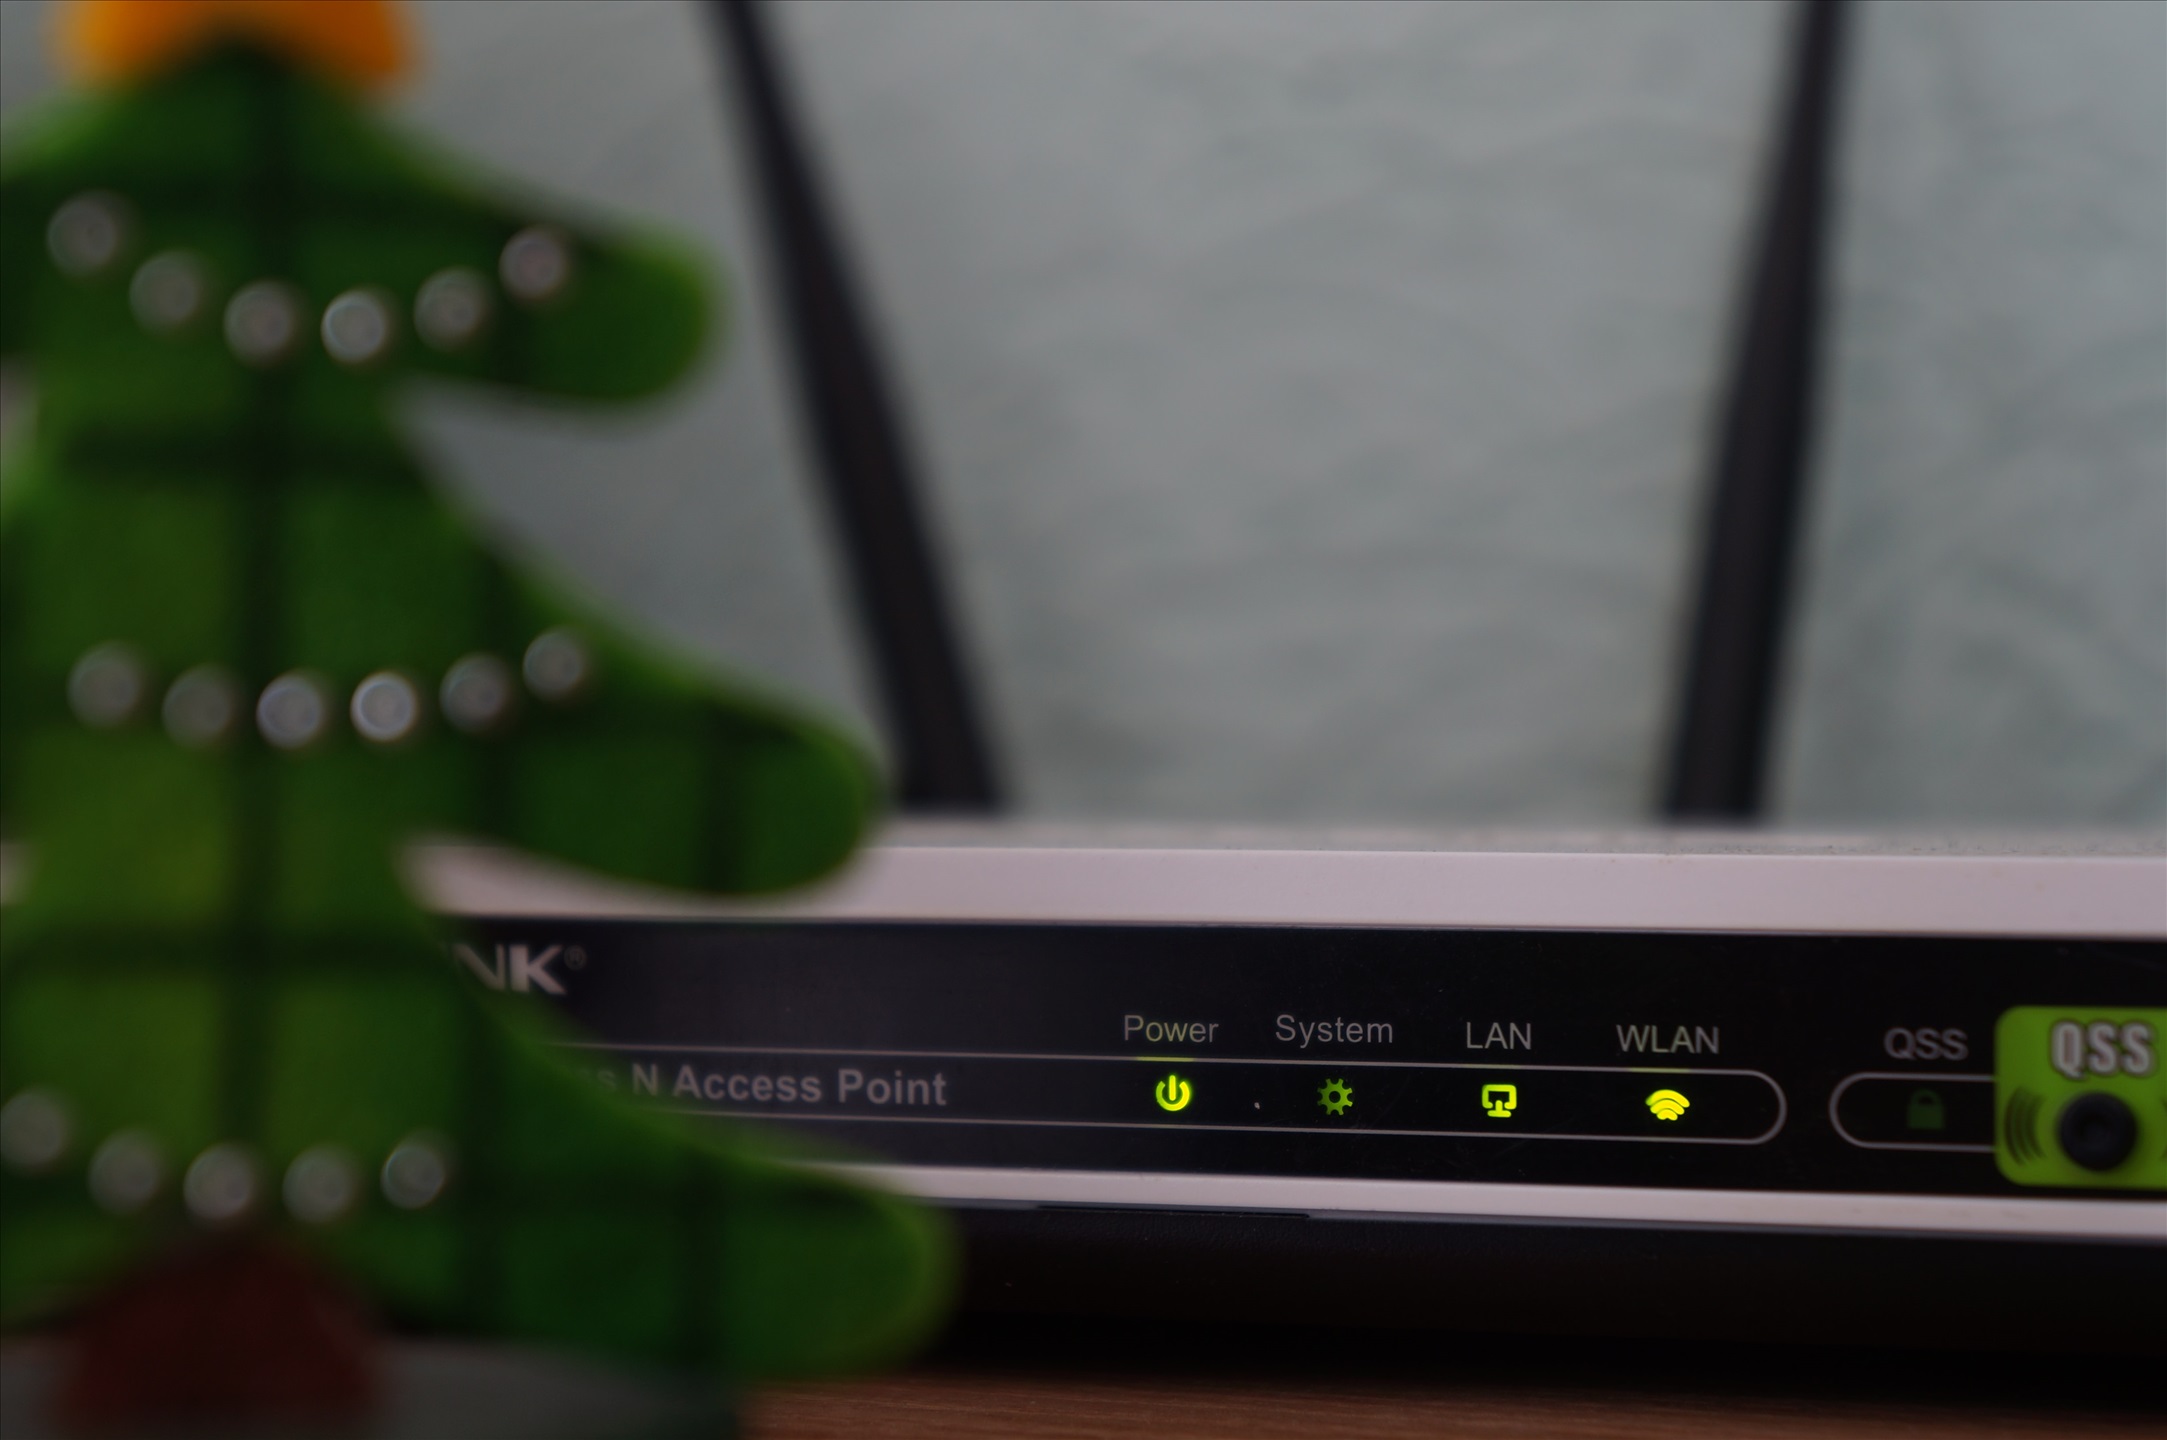 Can two routers be used on the same home network?